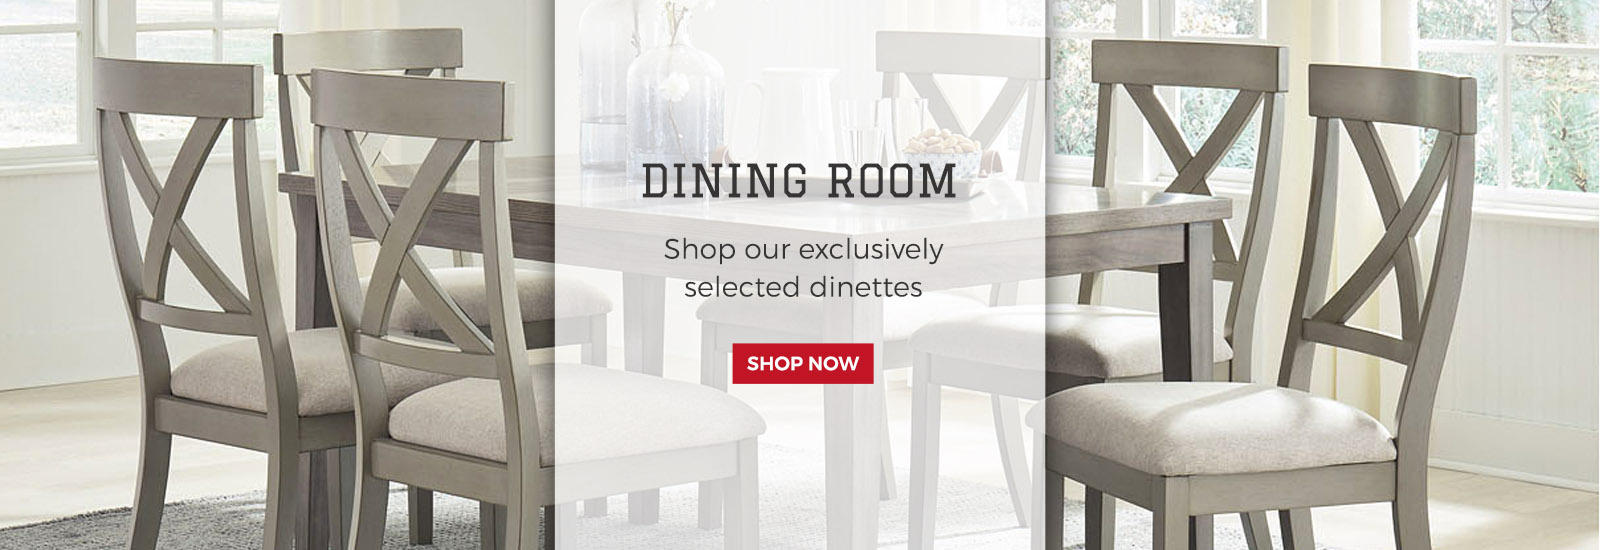 Dining Room Banner